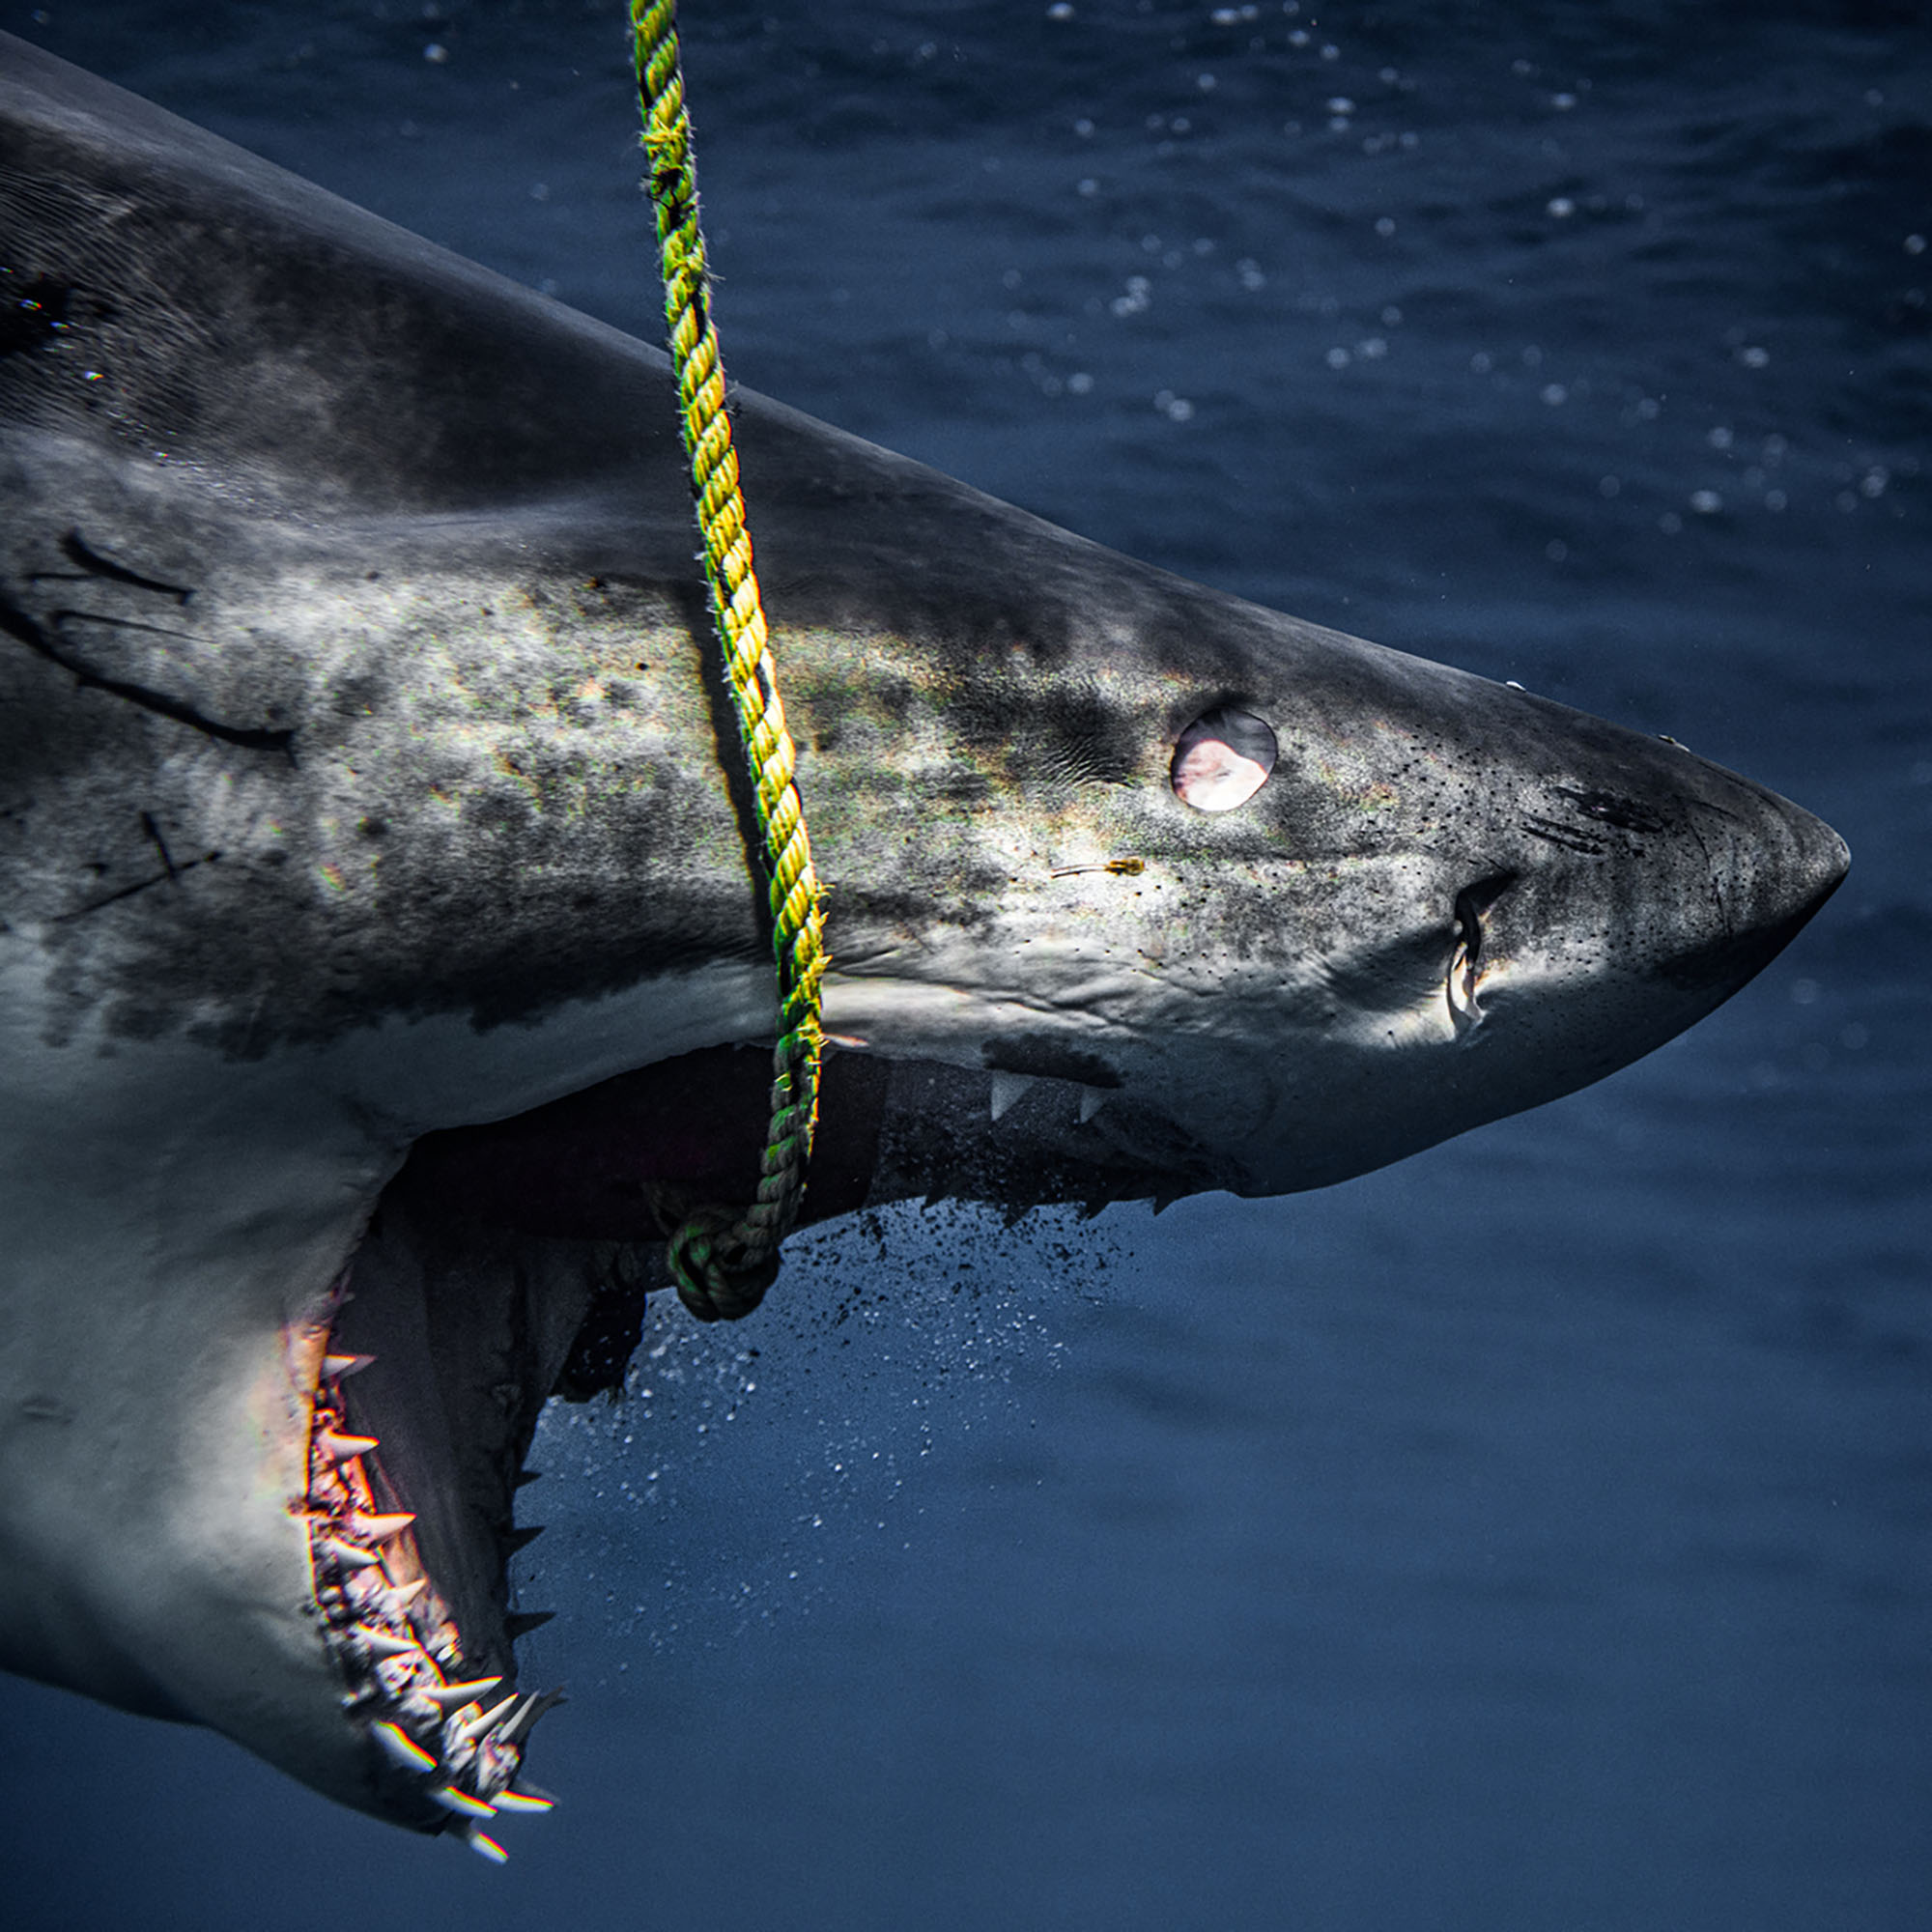 A scary video captured from inside a shark cage shows a large great white shark approaching bait tied to a boat.